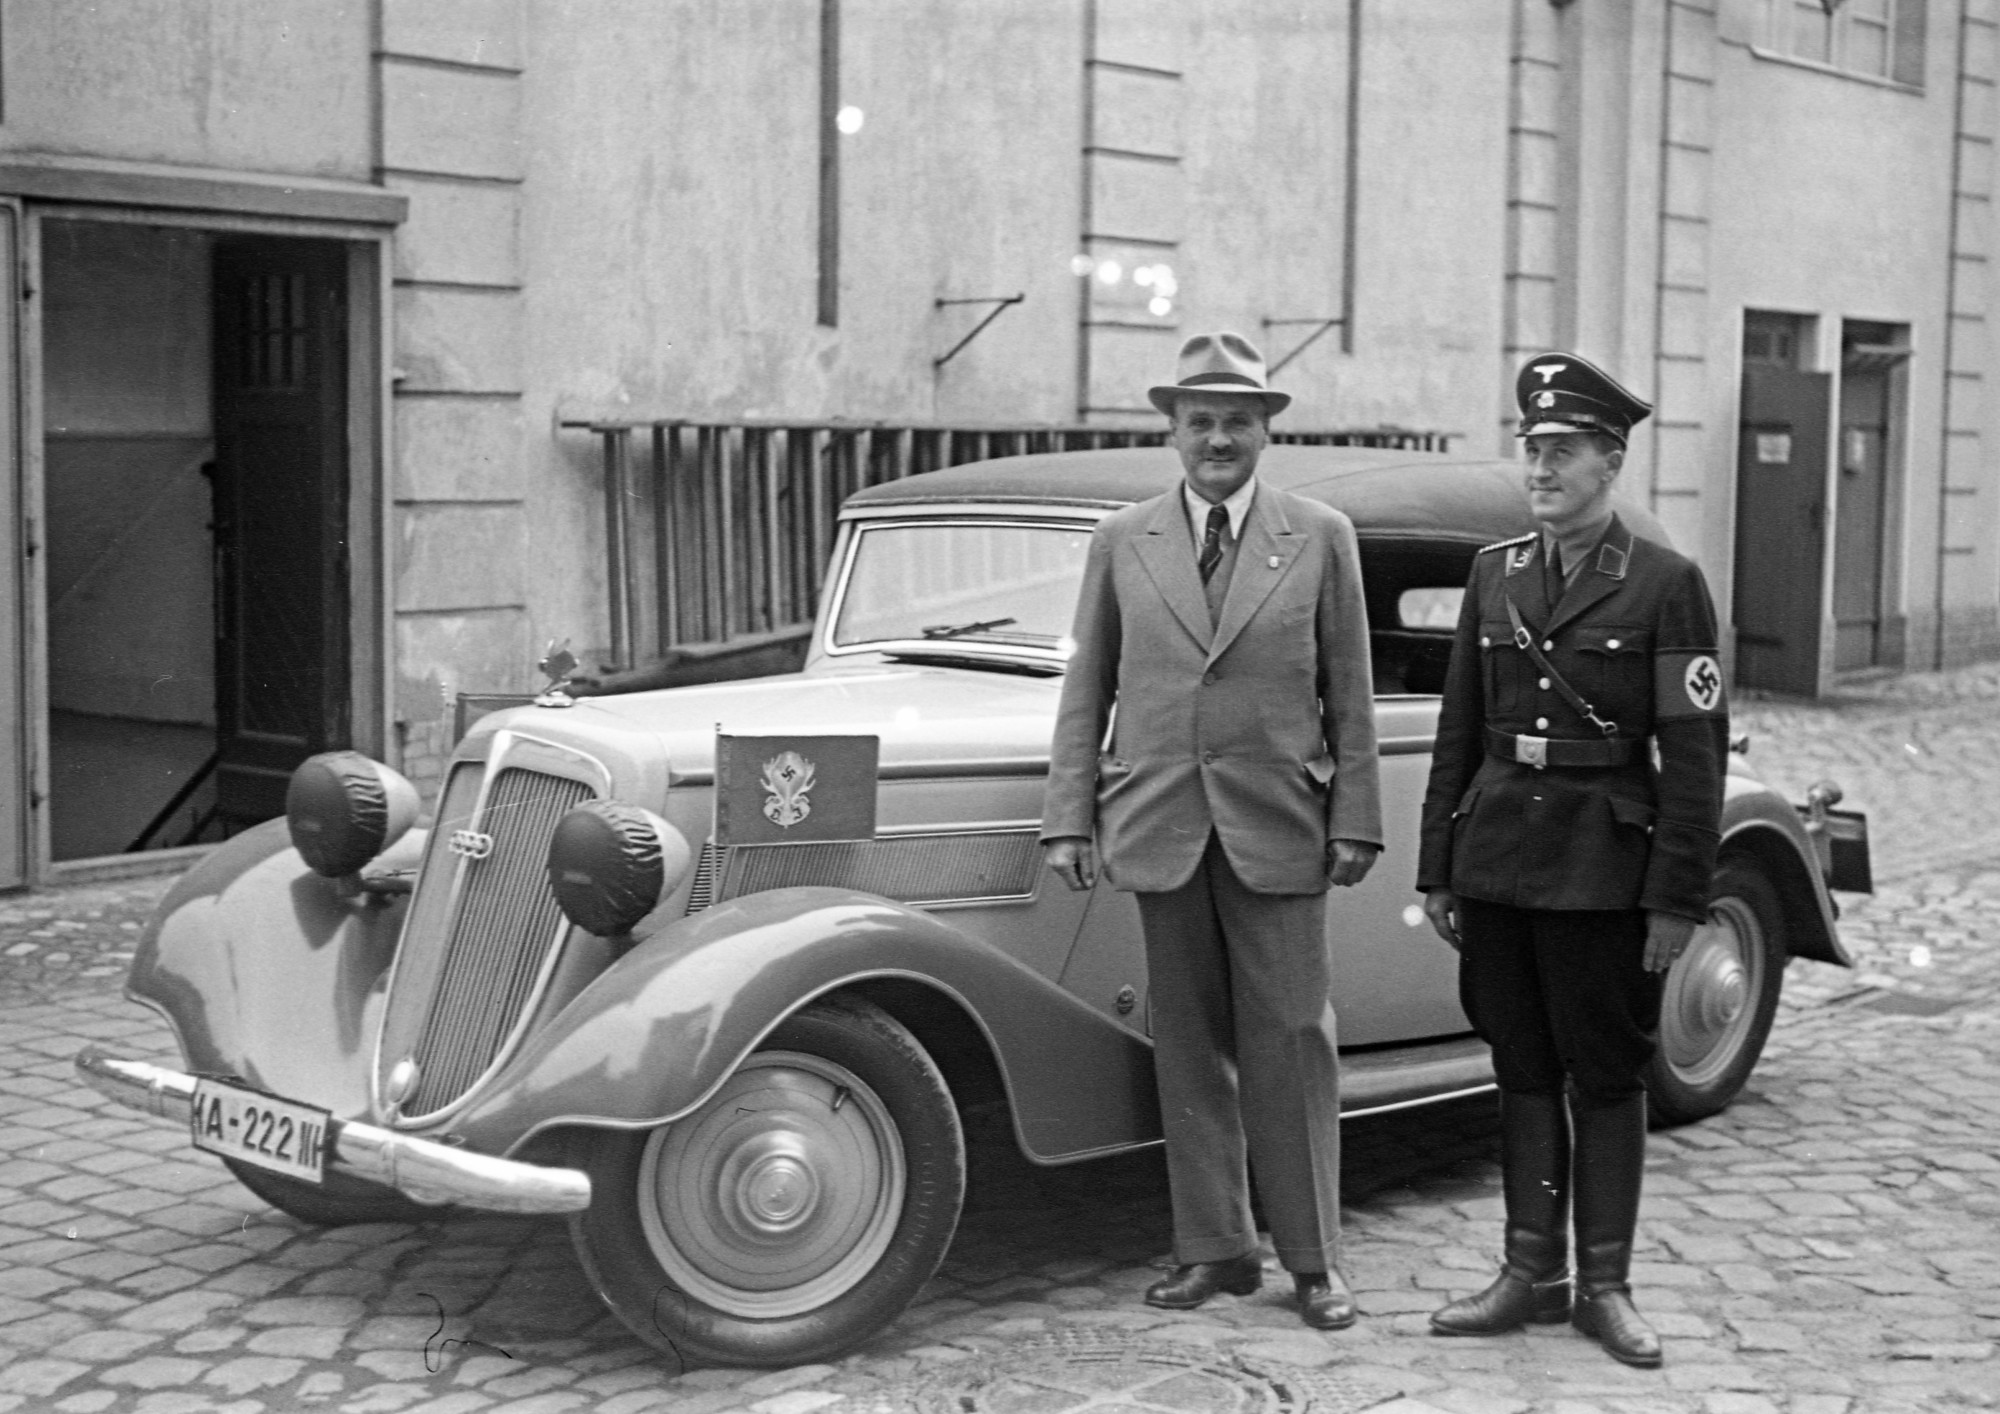 Black and white photograph: Man in suit and hat (left), and man in Nazi uniform (right) stand smiling in front of a parked car.